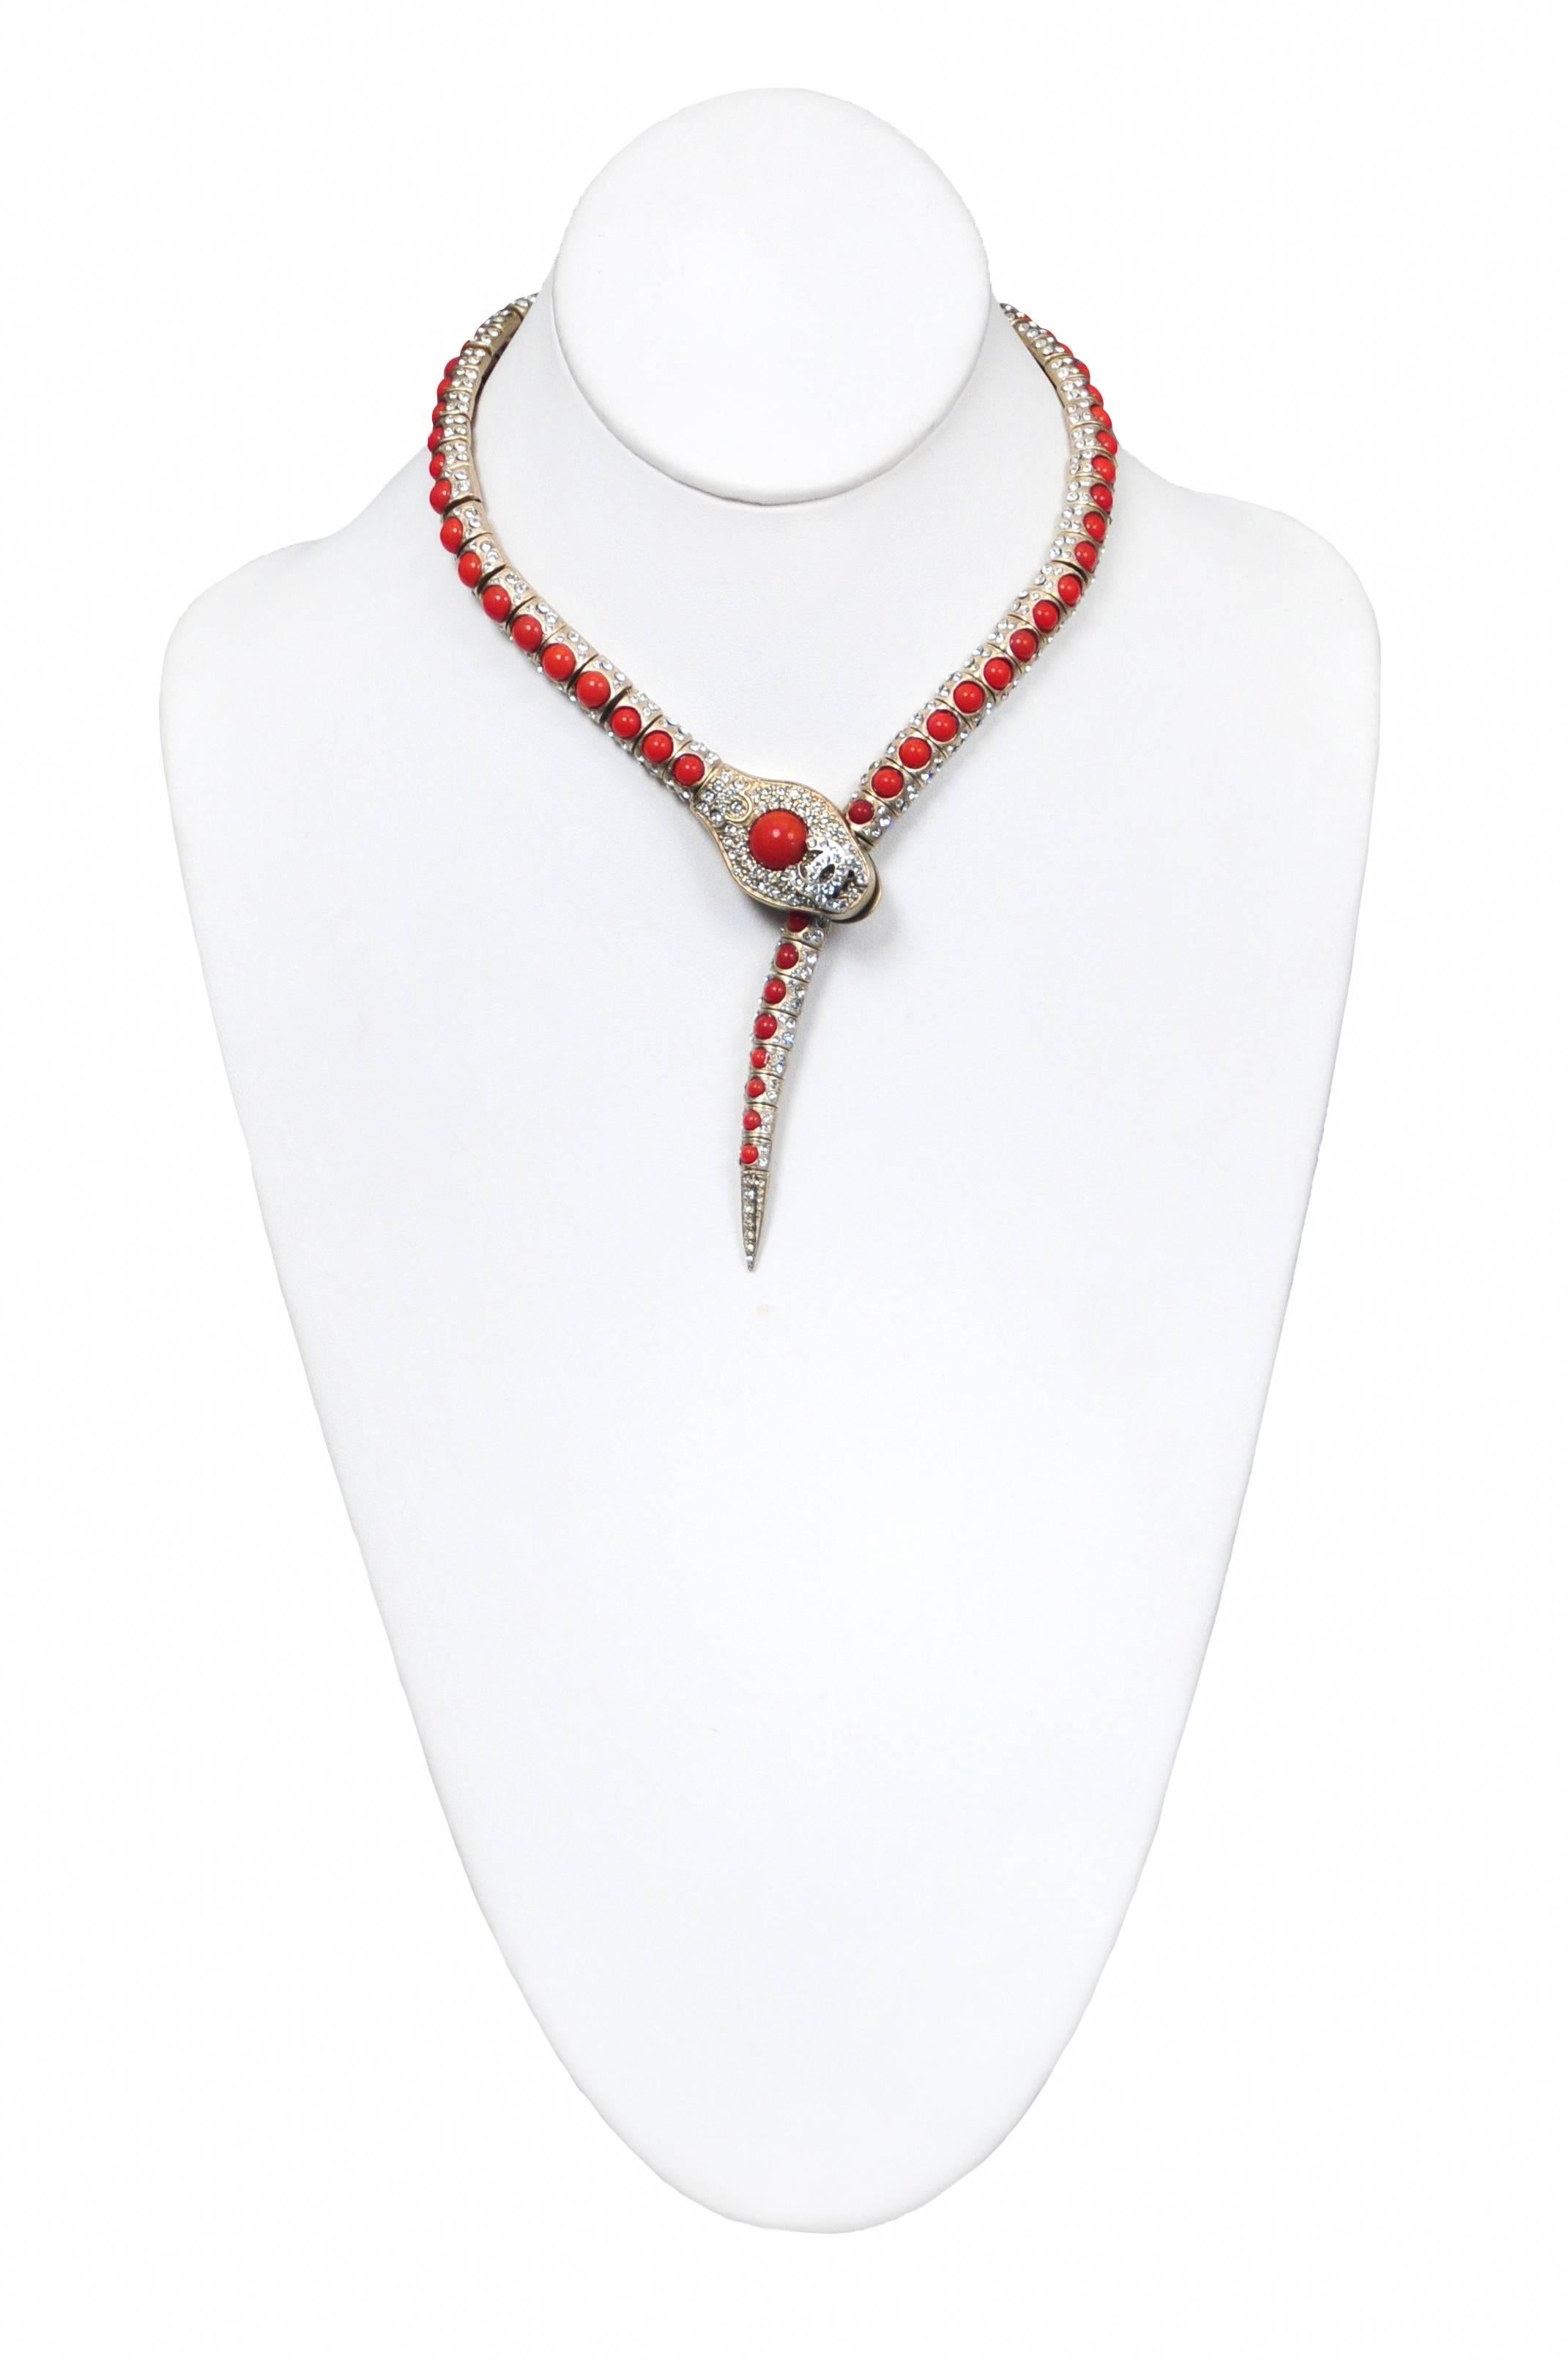 Vintage Chanel jeweled snake necklace featuring faux coral cabochons and crystals along the snake body and a faux coral larger cabochon and interlocking crystal CC's dot the snake head.